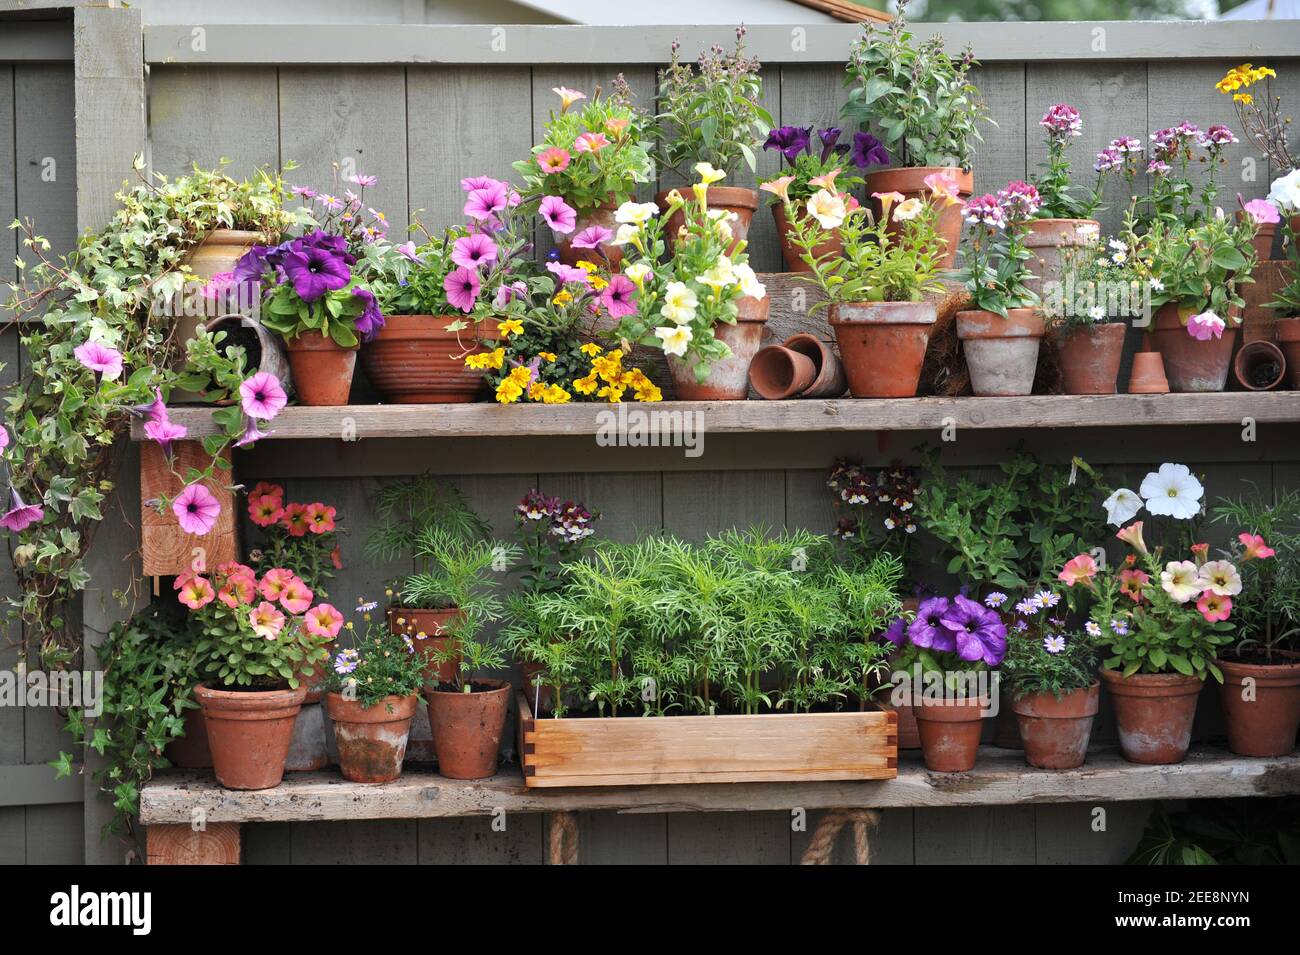 Petunia, nemesia and vegetable seedlings in terra cotta and wooden pots on fence shelves in a garden Stock Photo